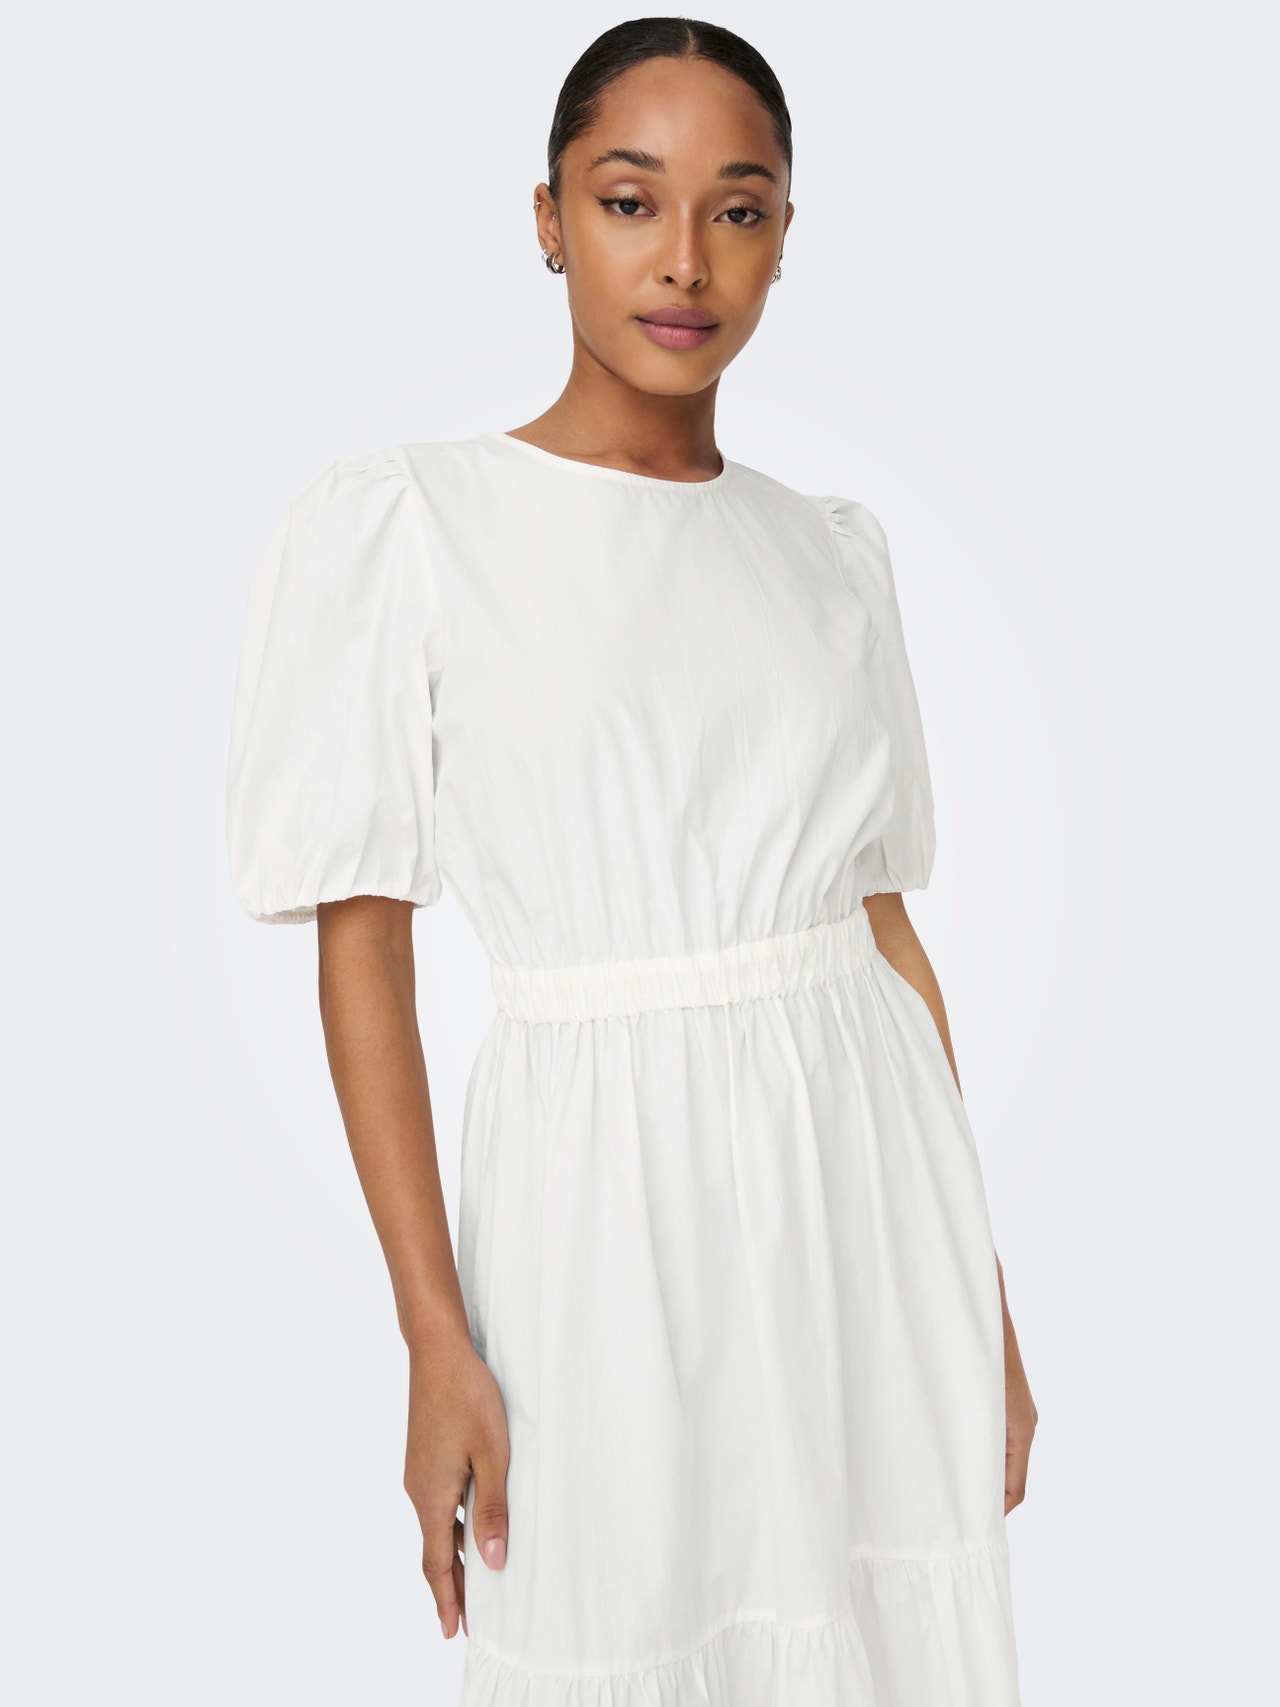 ONLY Midi dress with tie detail -Cloud Dancer - 15296213